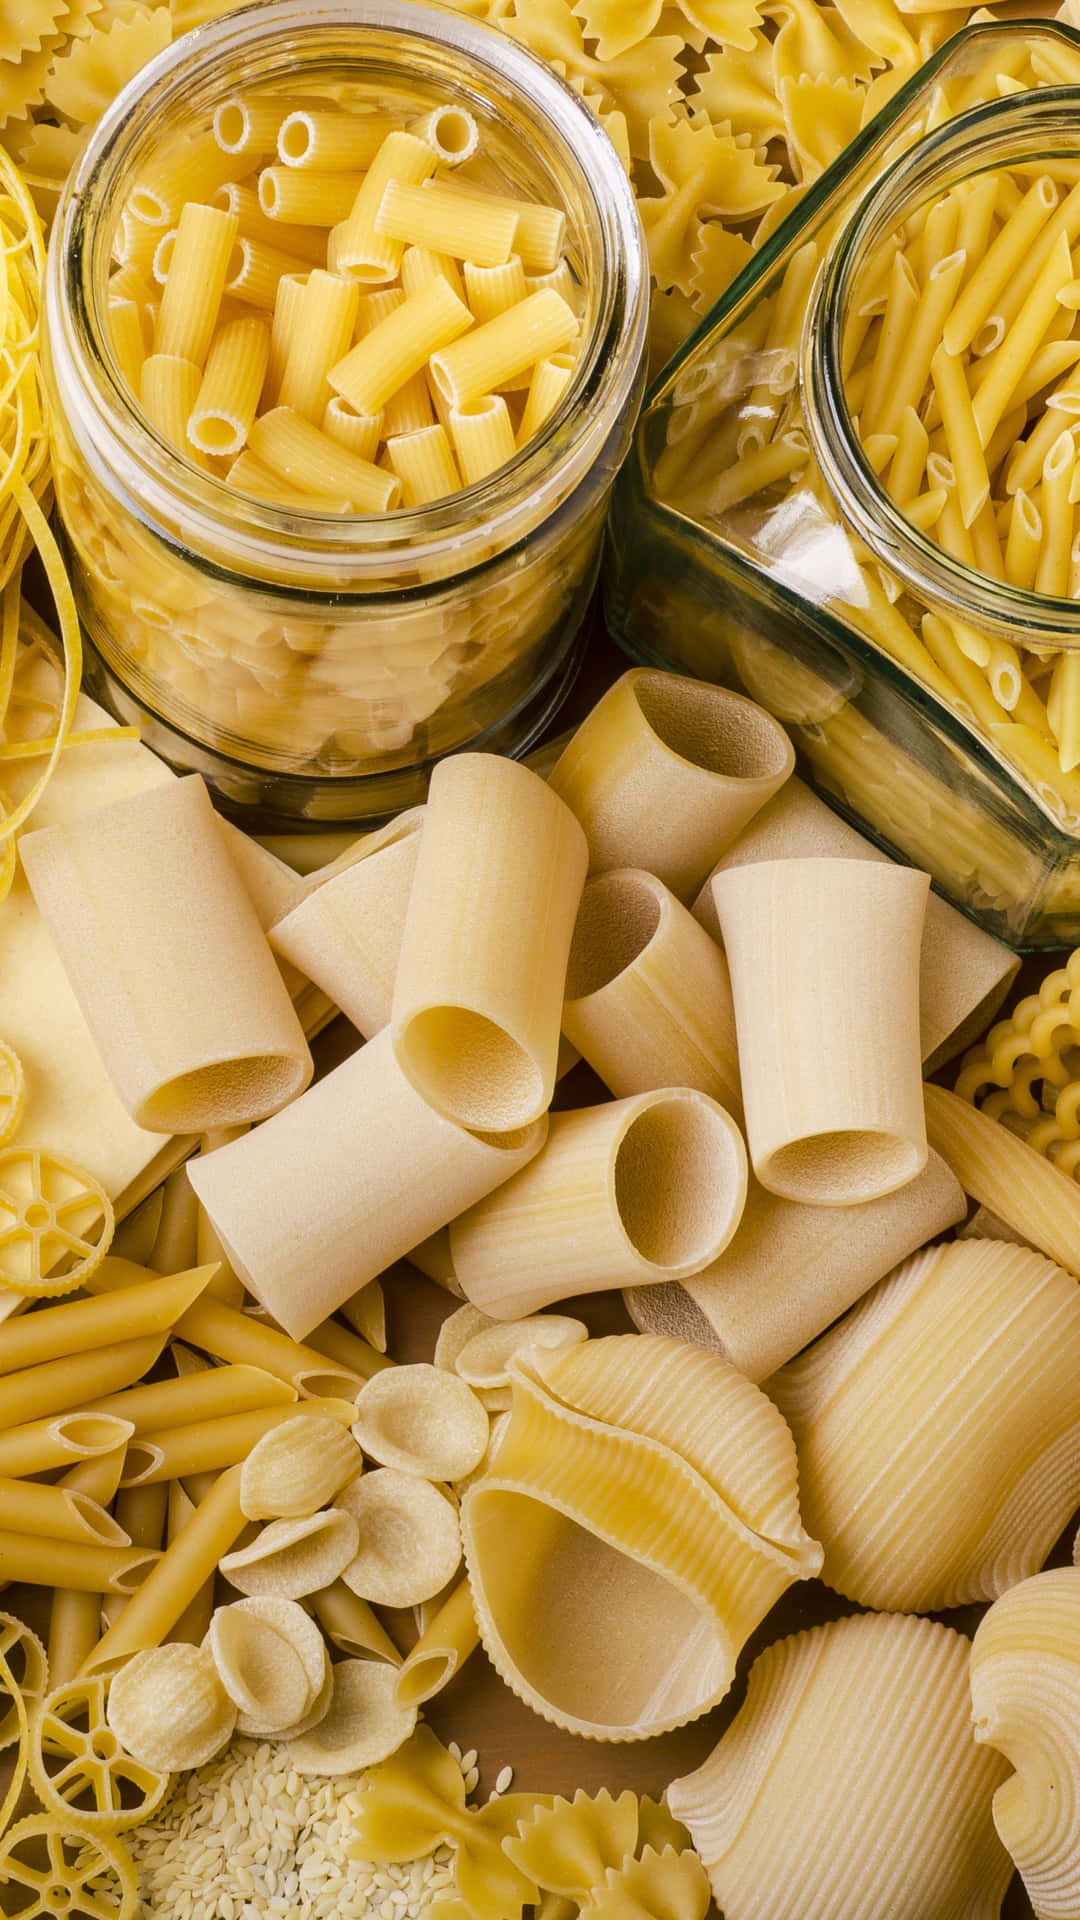 Download Android Pasta Background Various Uncooked Pasta In Jars ...